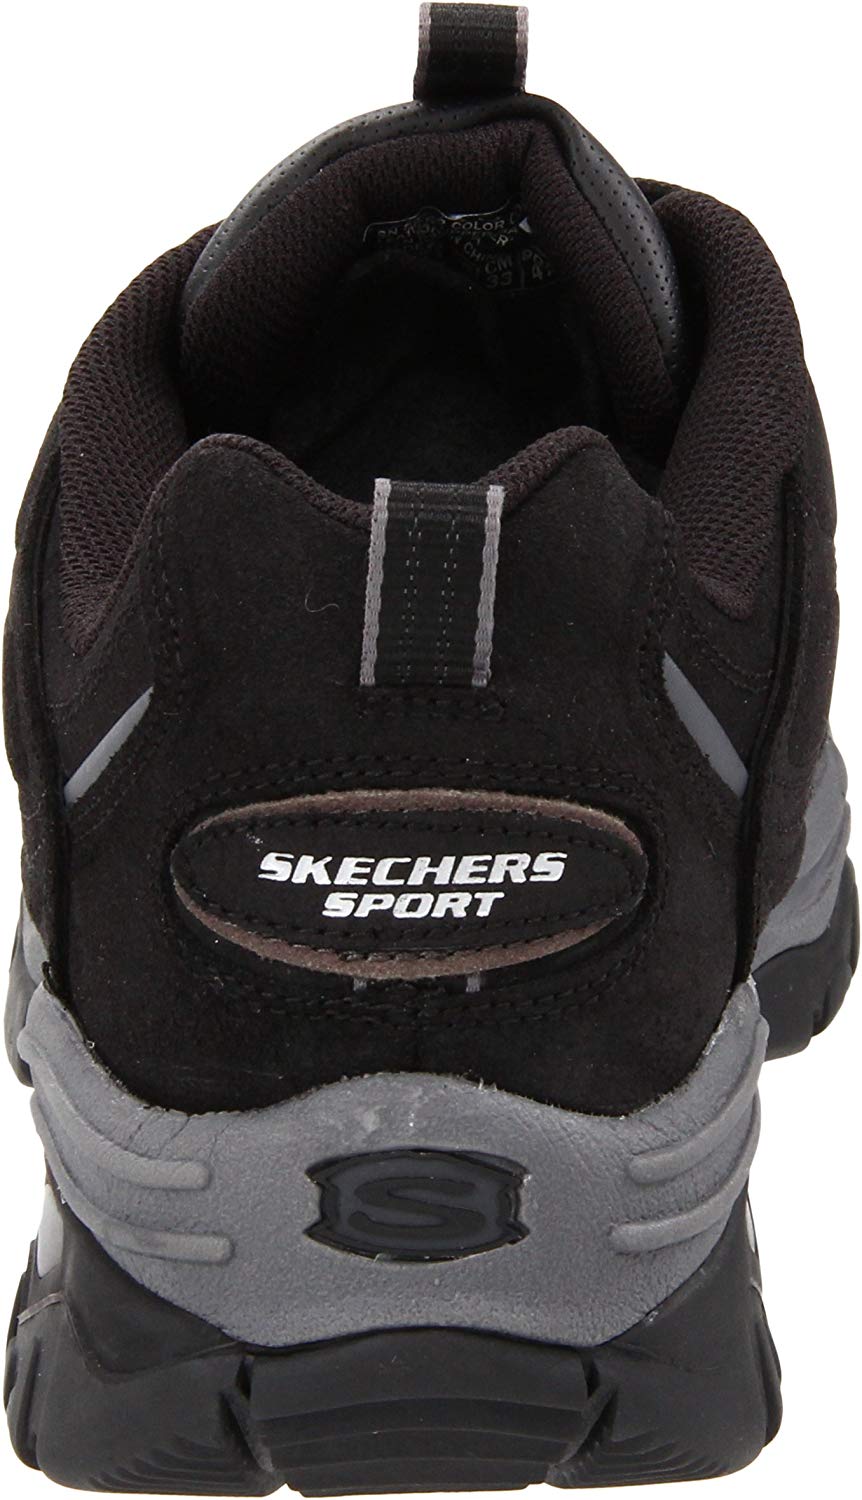 Skechers Mens Energy Downforce Low Top Lace Up Fashion Sneakers, Black ...